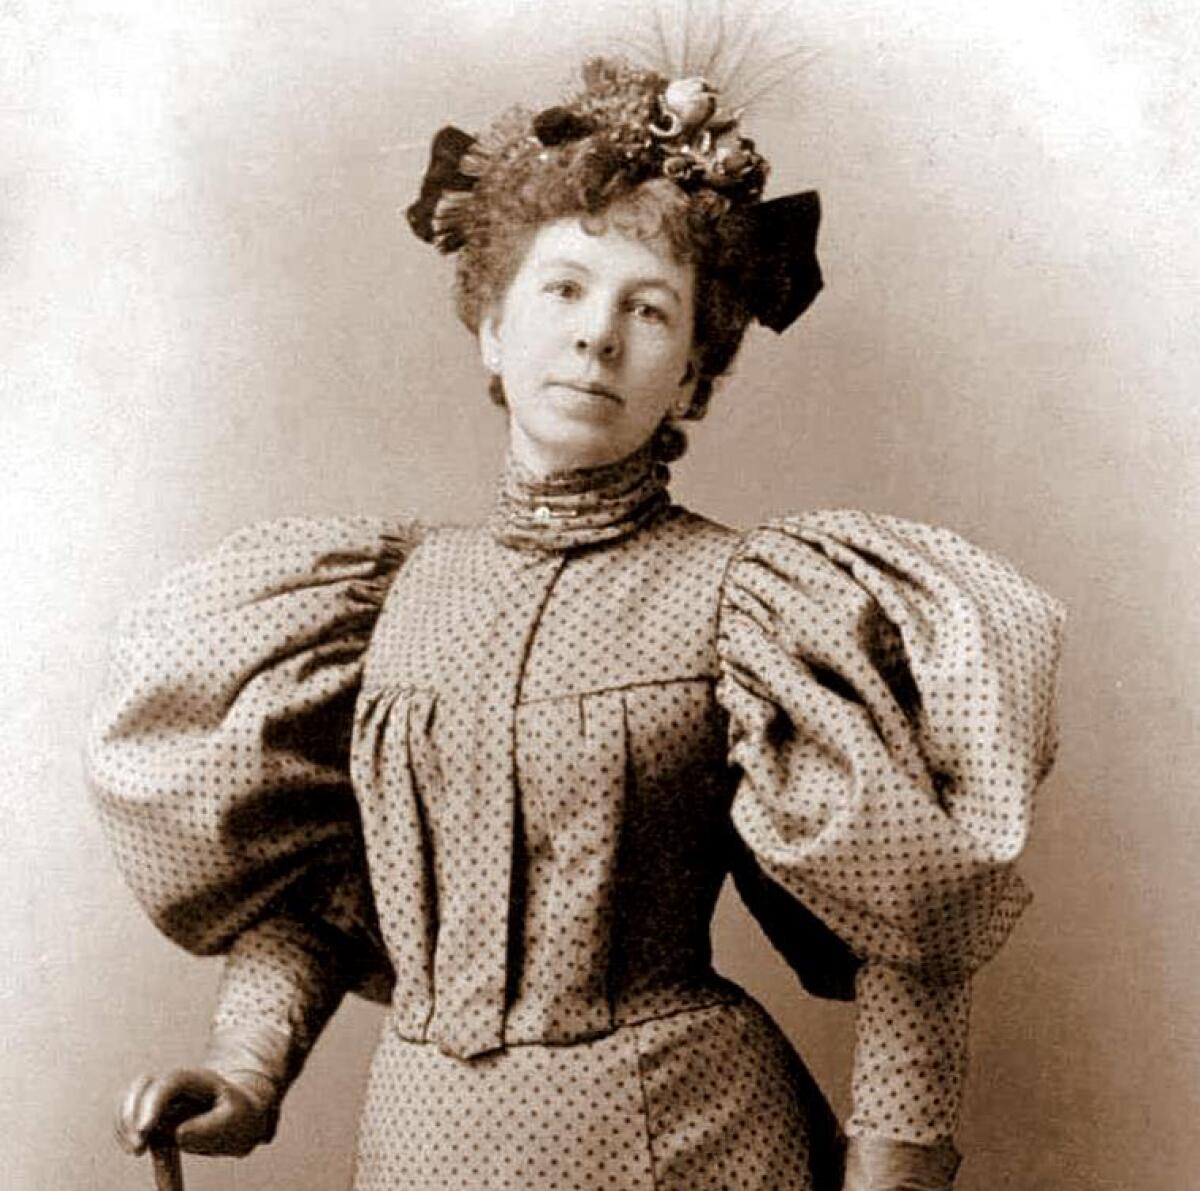 A woman poses for a photo wearing a small hat with a fake bird and a dress with mutton-chop sleeves and high neck.